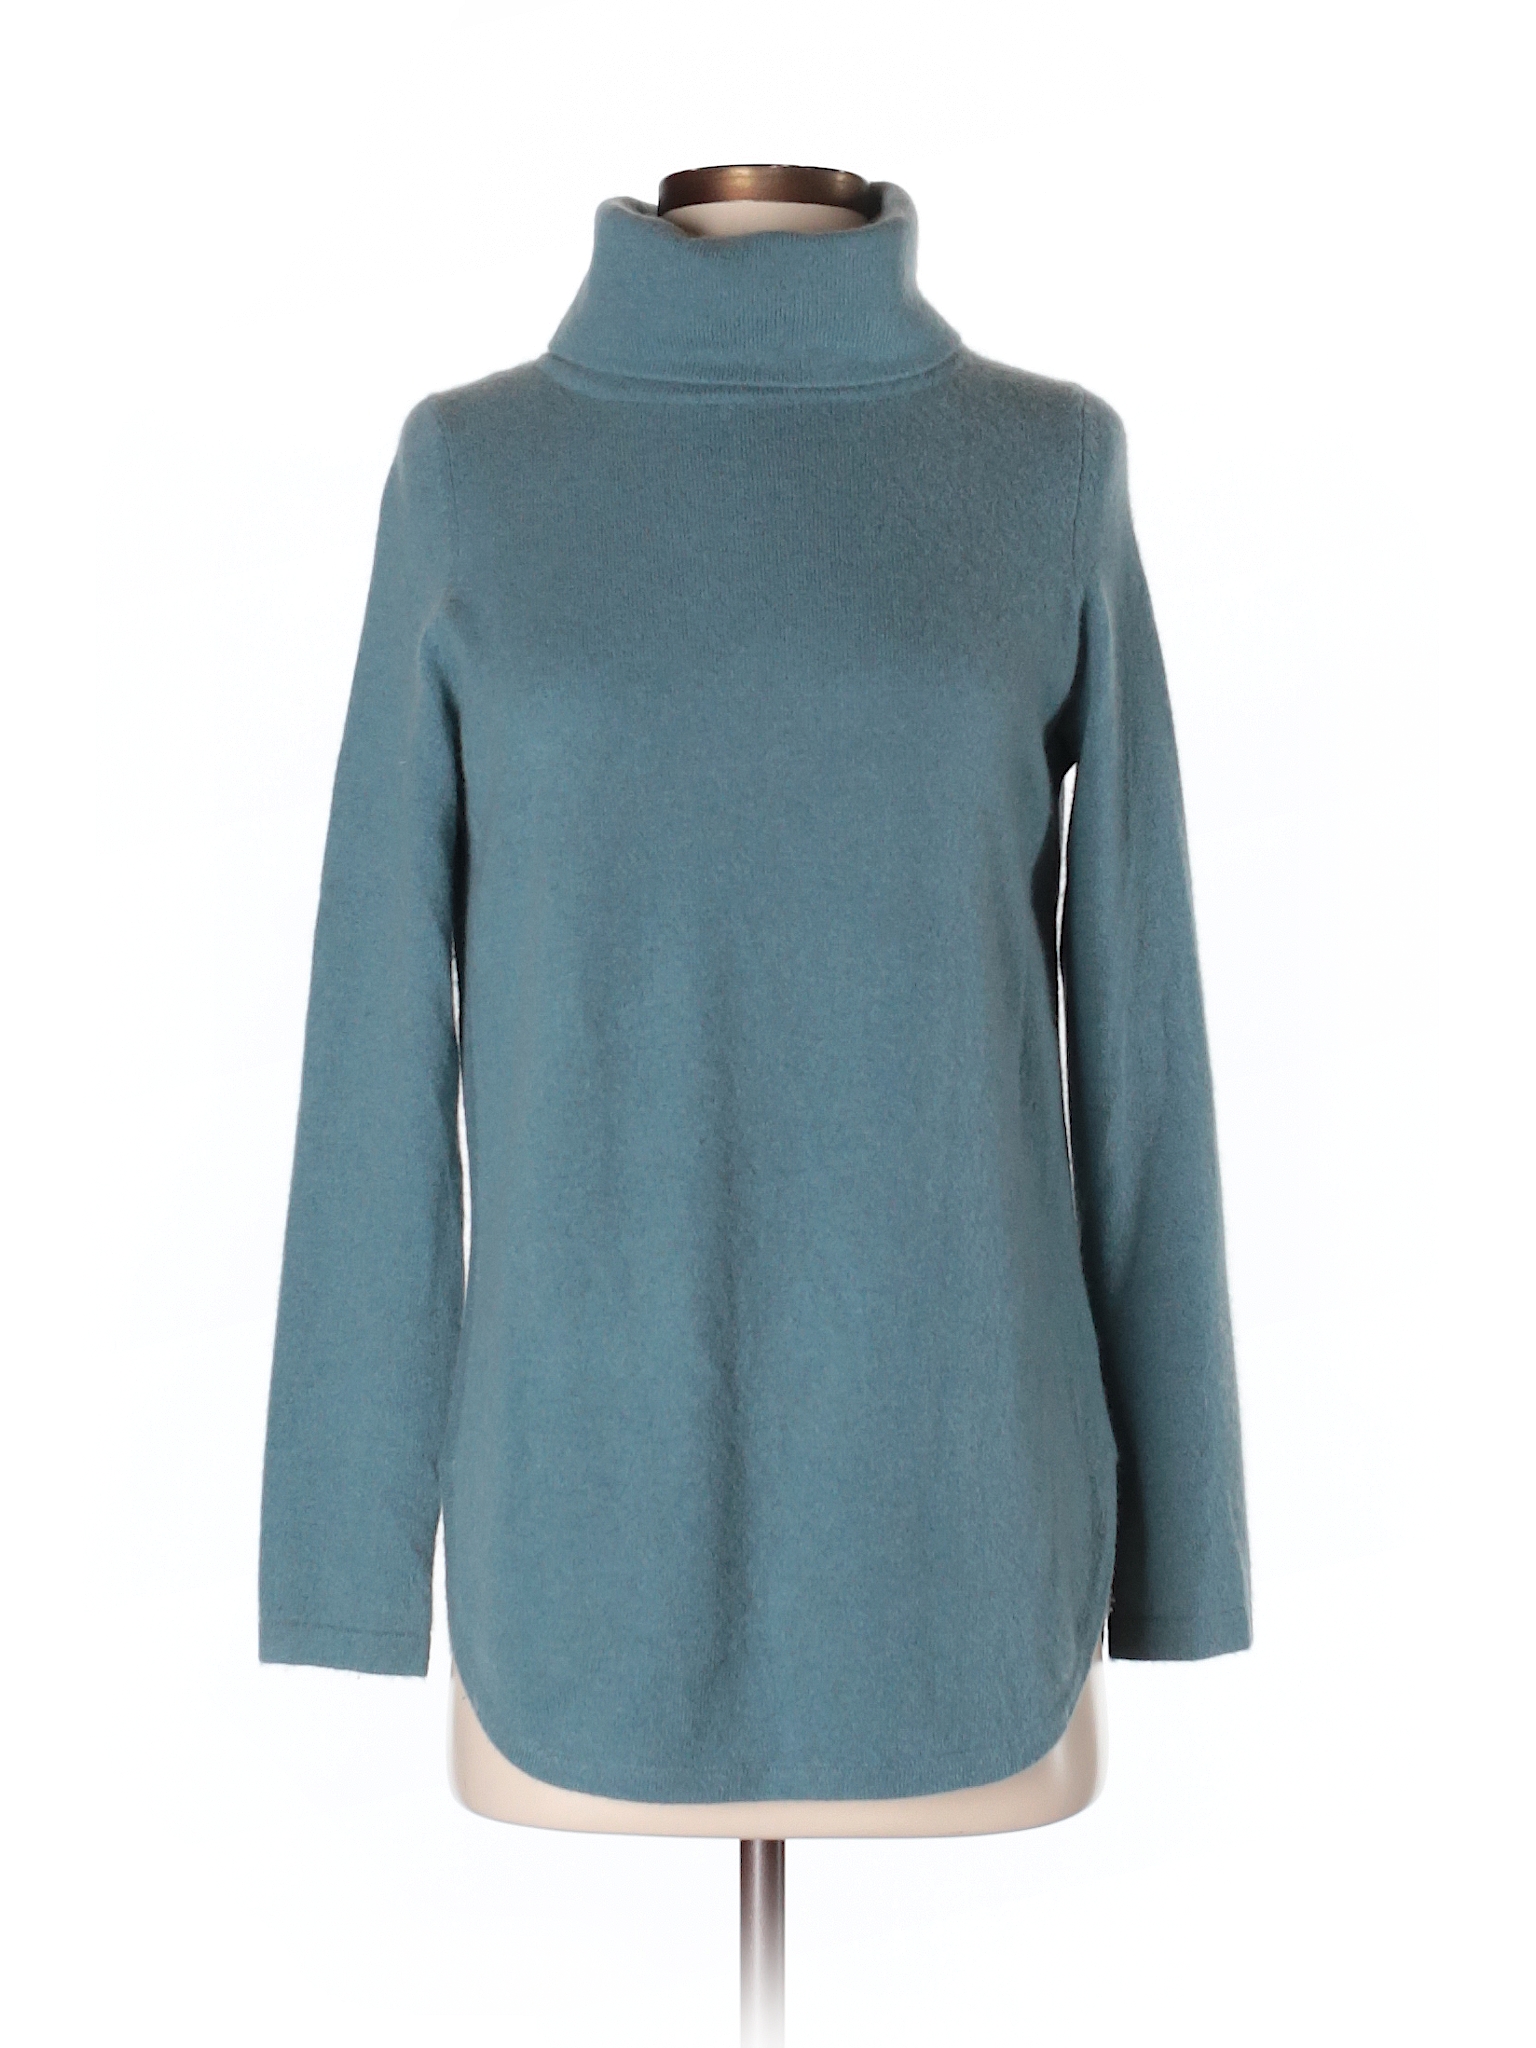 Cynthia Rowley TJX 100% Cashmere Solid Teal Cashmere Pullover Sweater ...